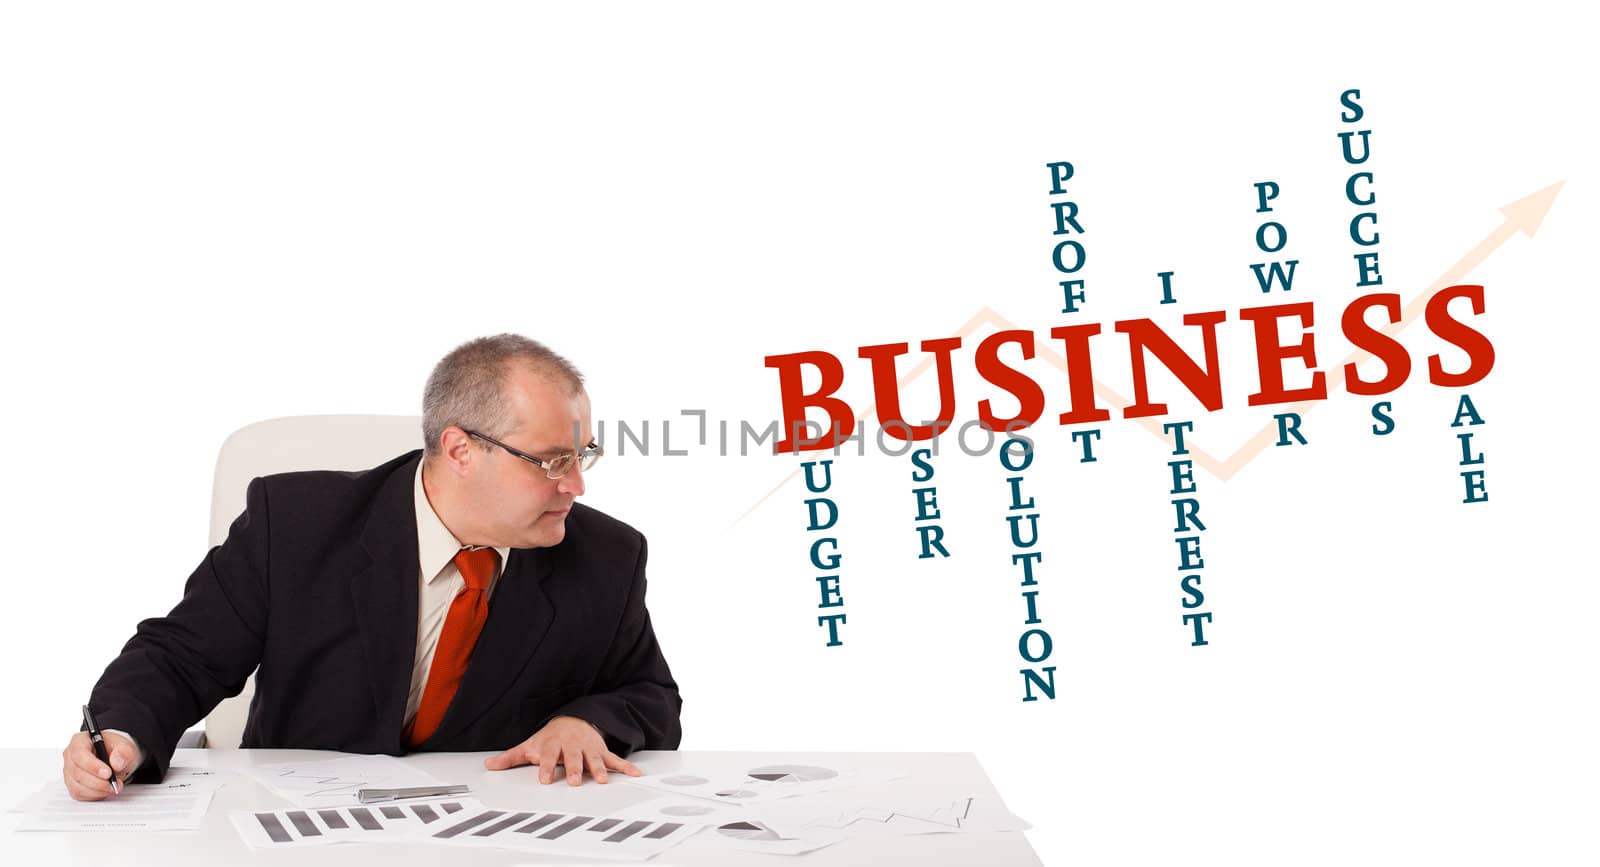 businessman sitting at desk with word cloud, isolated on white